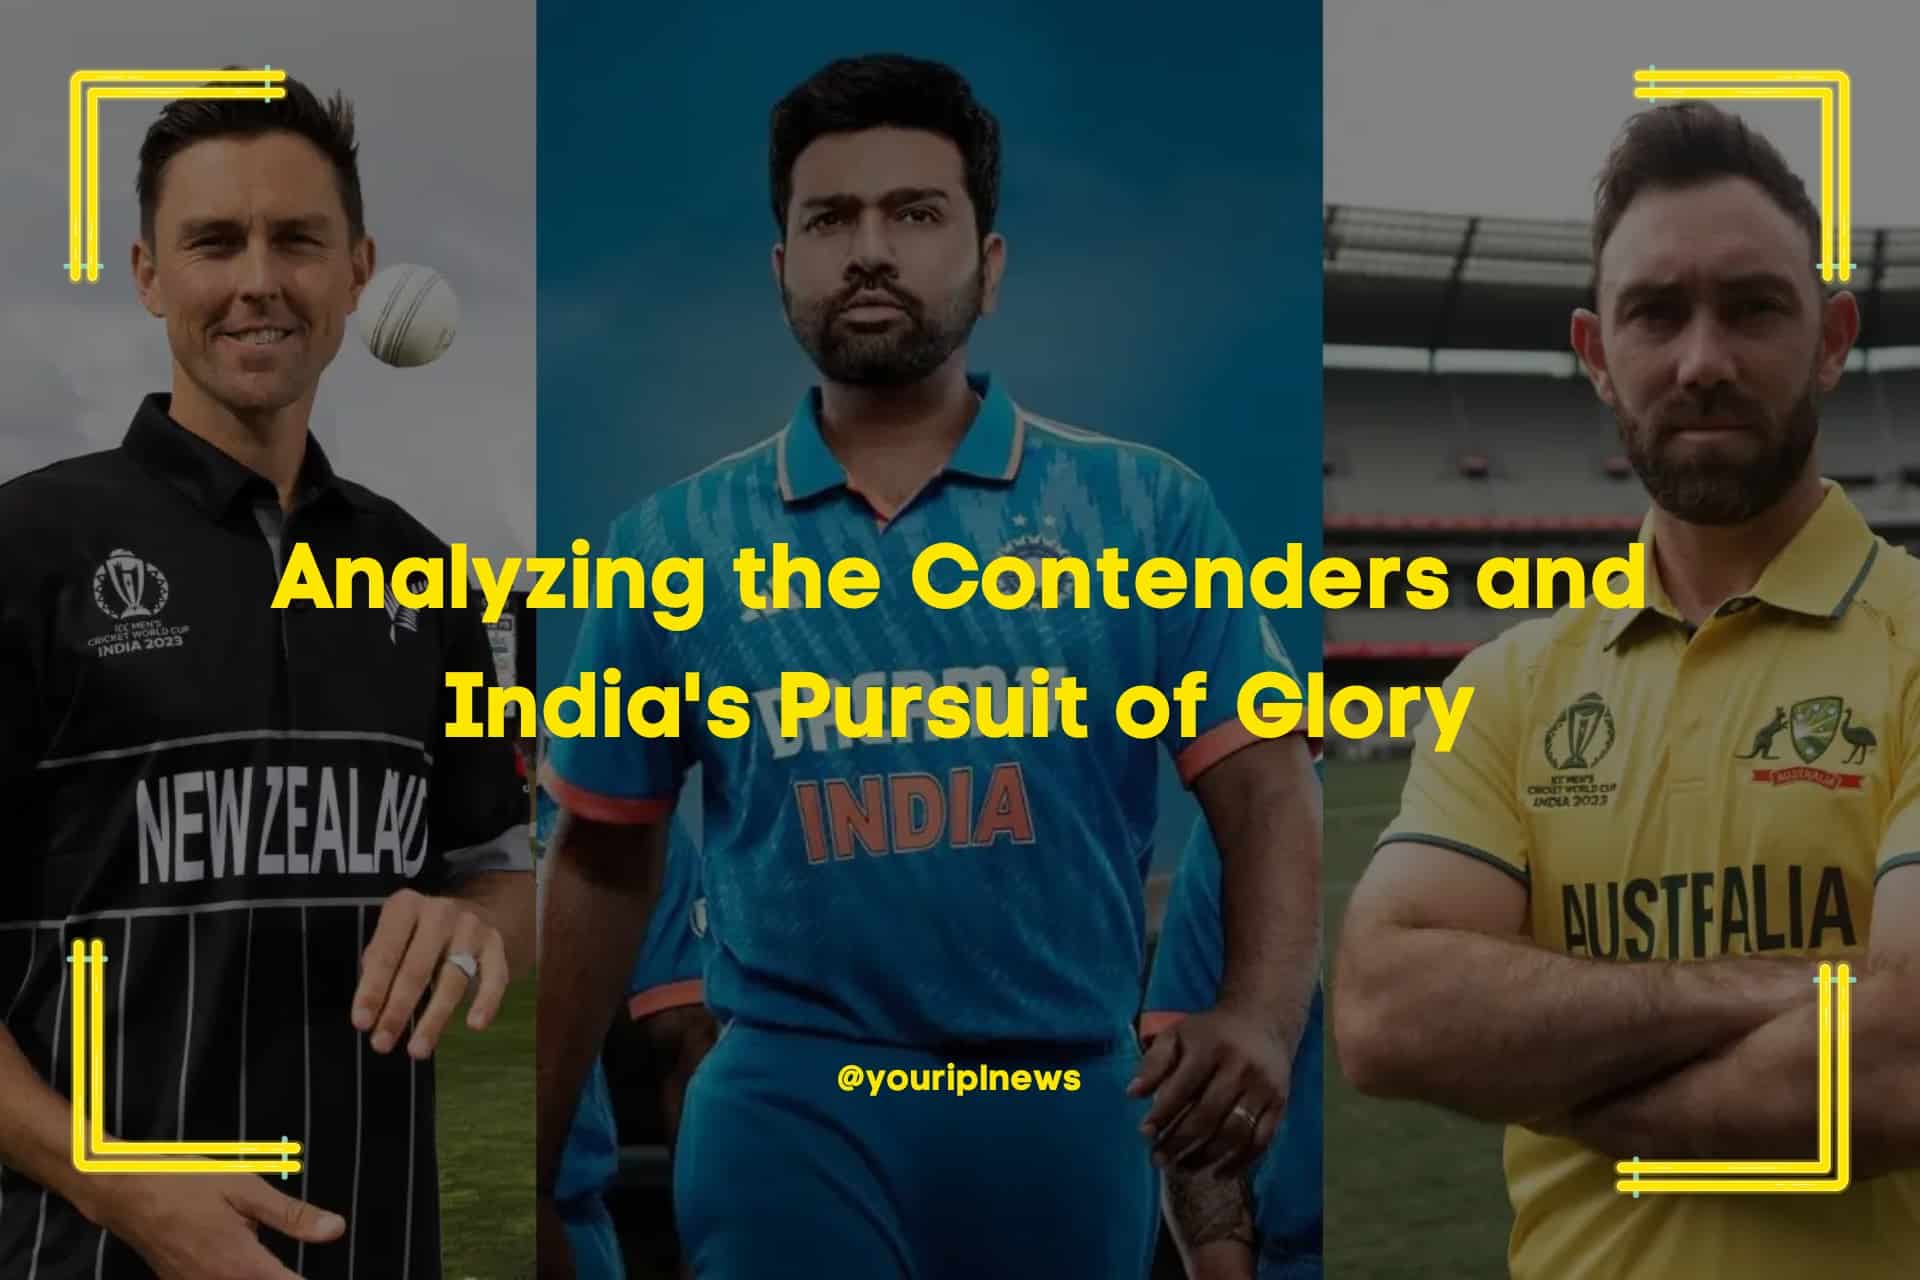 Analyzing the Contenders and India's Pursuit of Glory